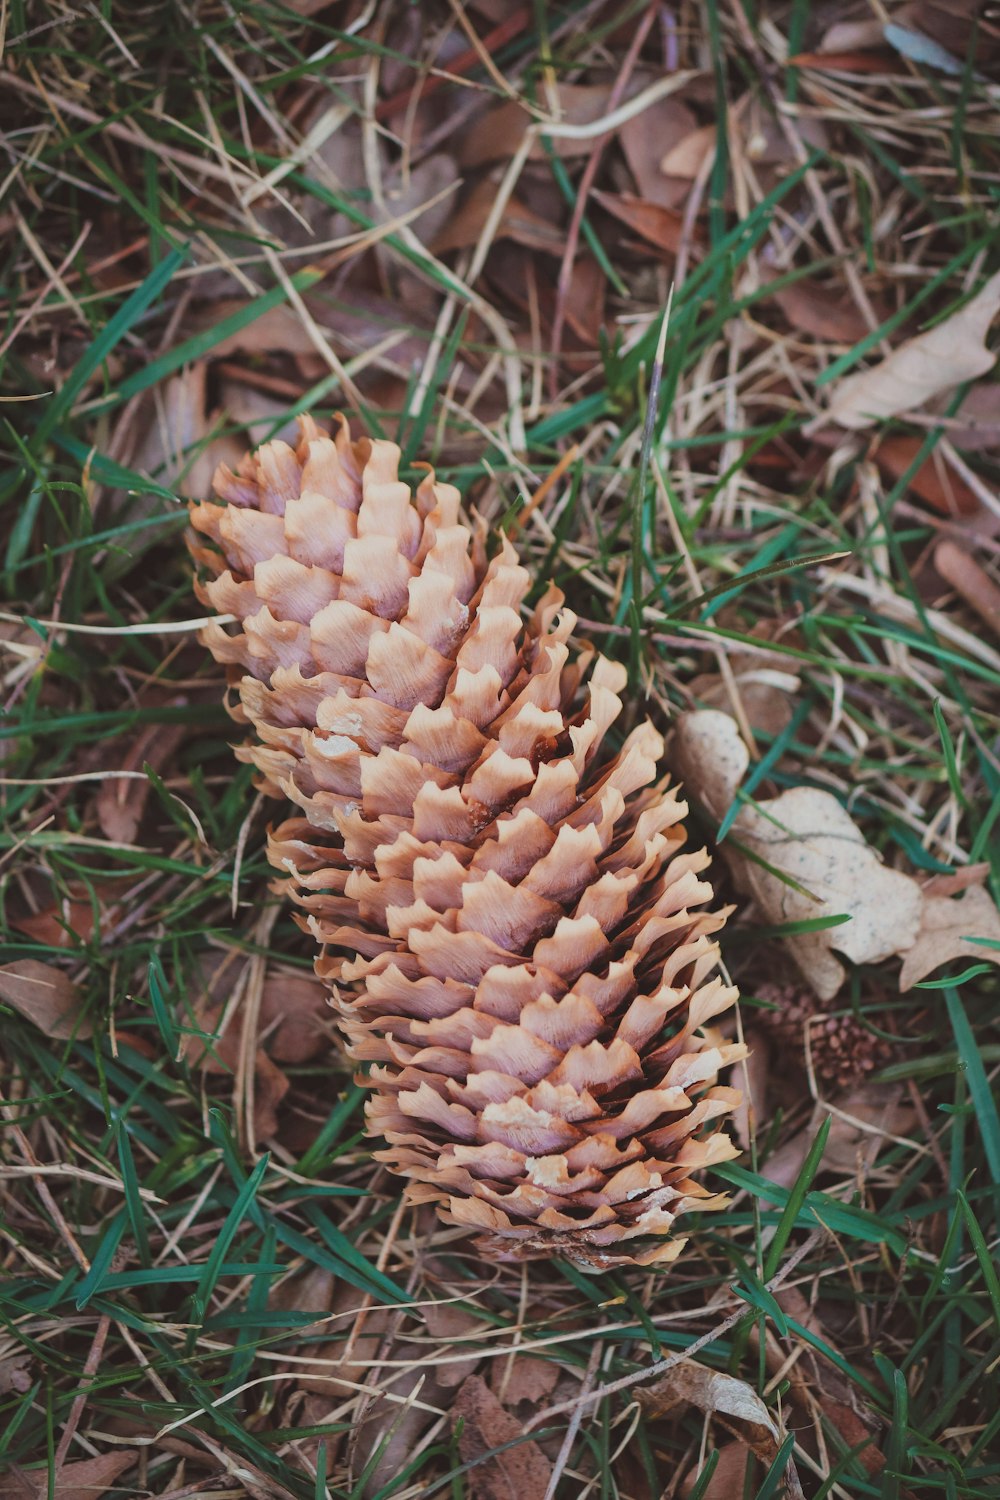 a pine cone laying on the ground in the grass